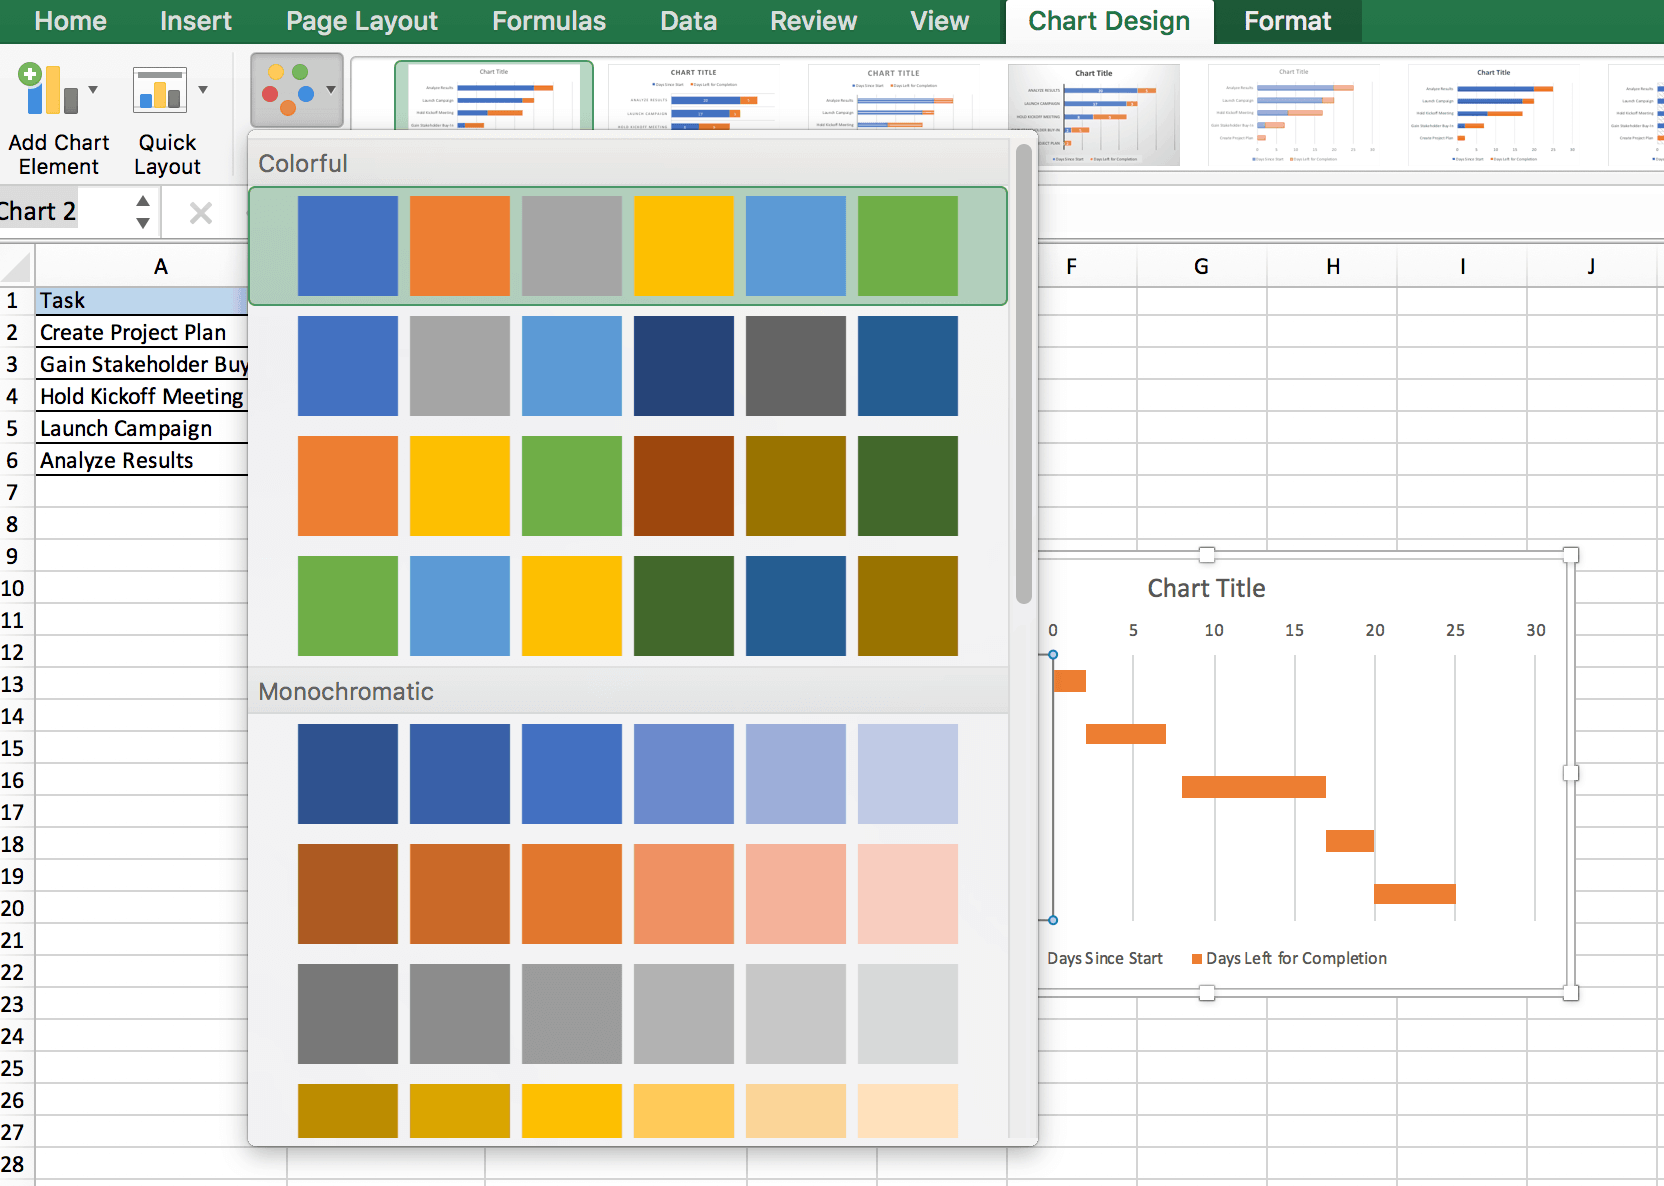 Chart design tab in Excel to create a Gantt chart.